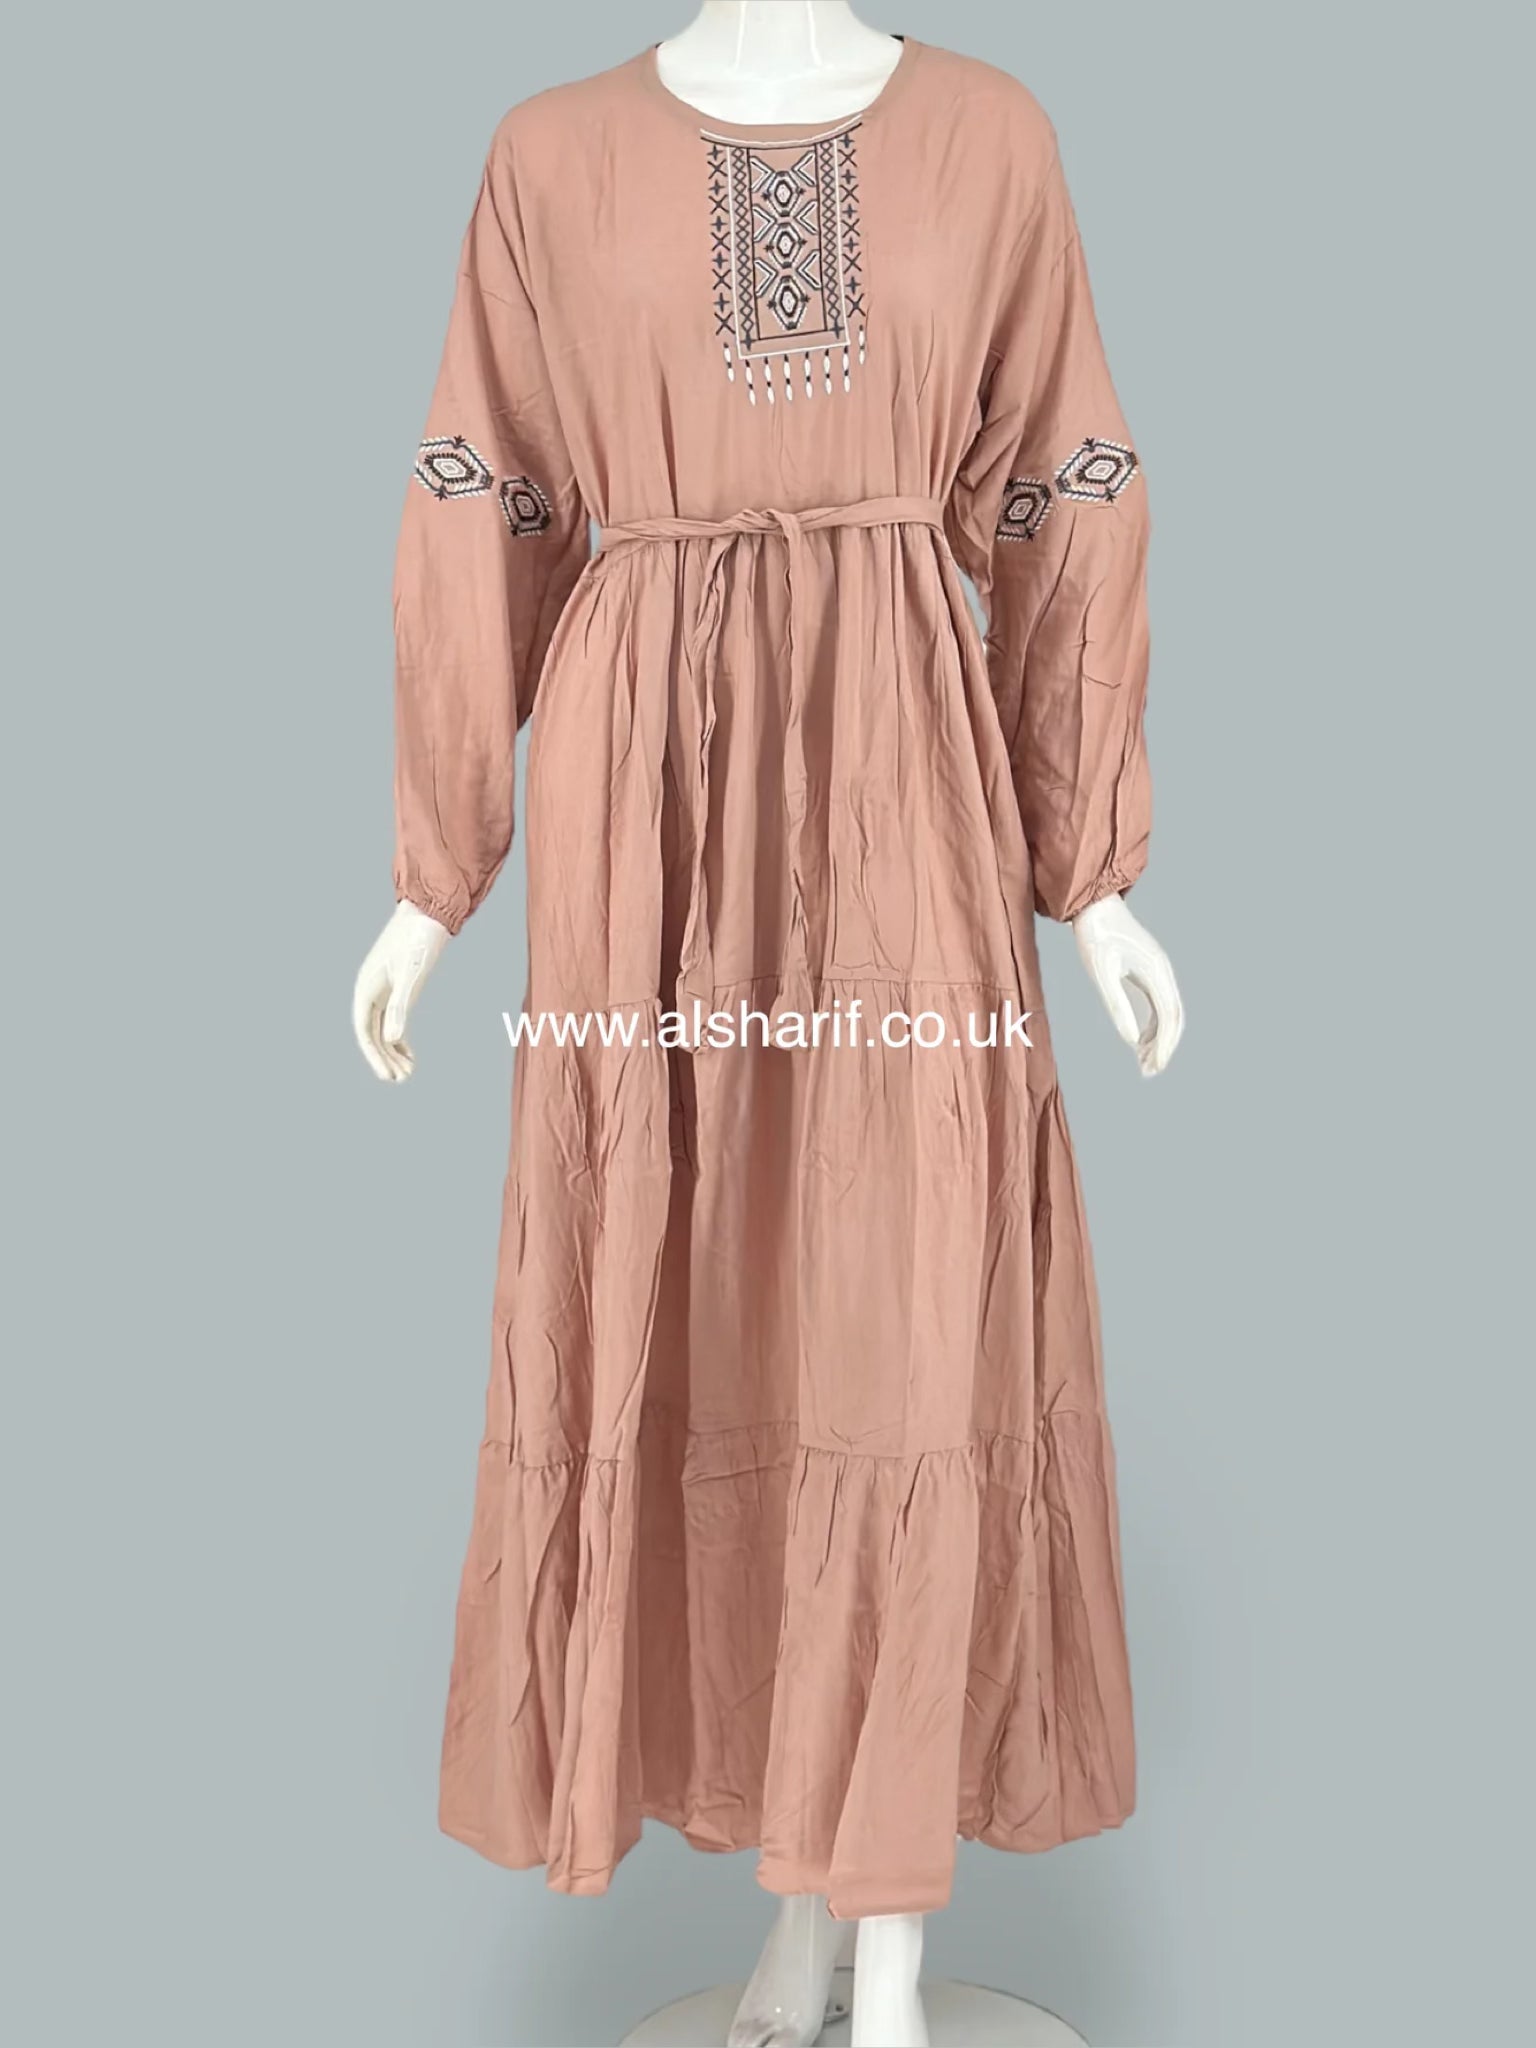 Flared Embroidered Tiered Cotton Dress - D37